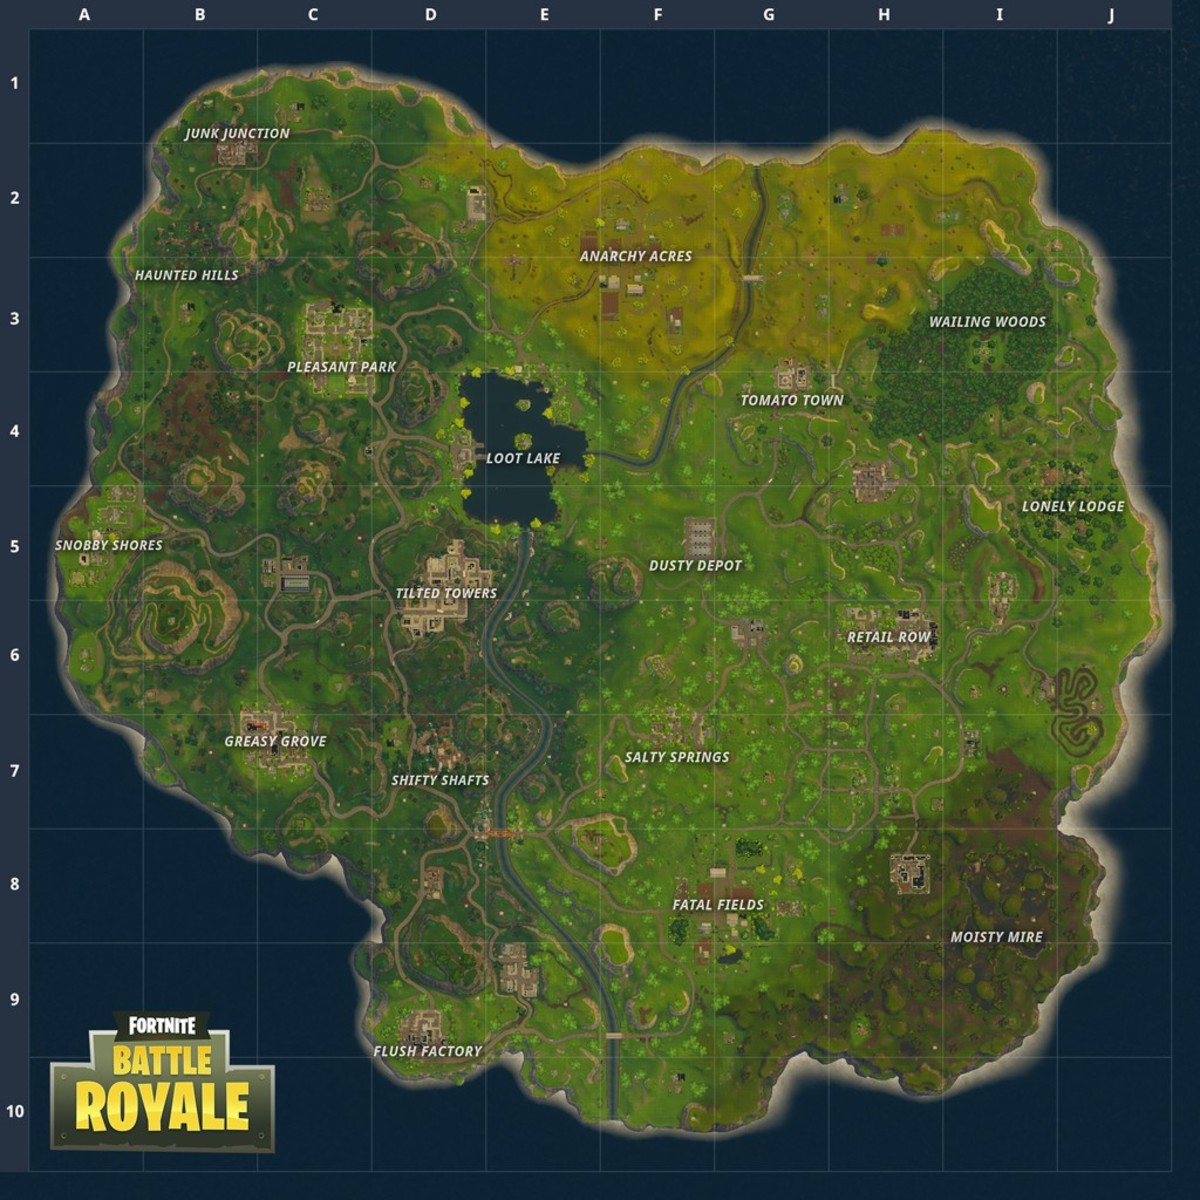 Fortnite's map was updated in early 2018.